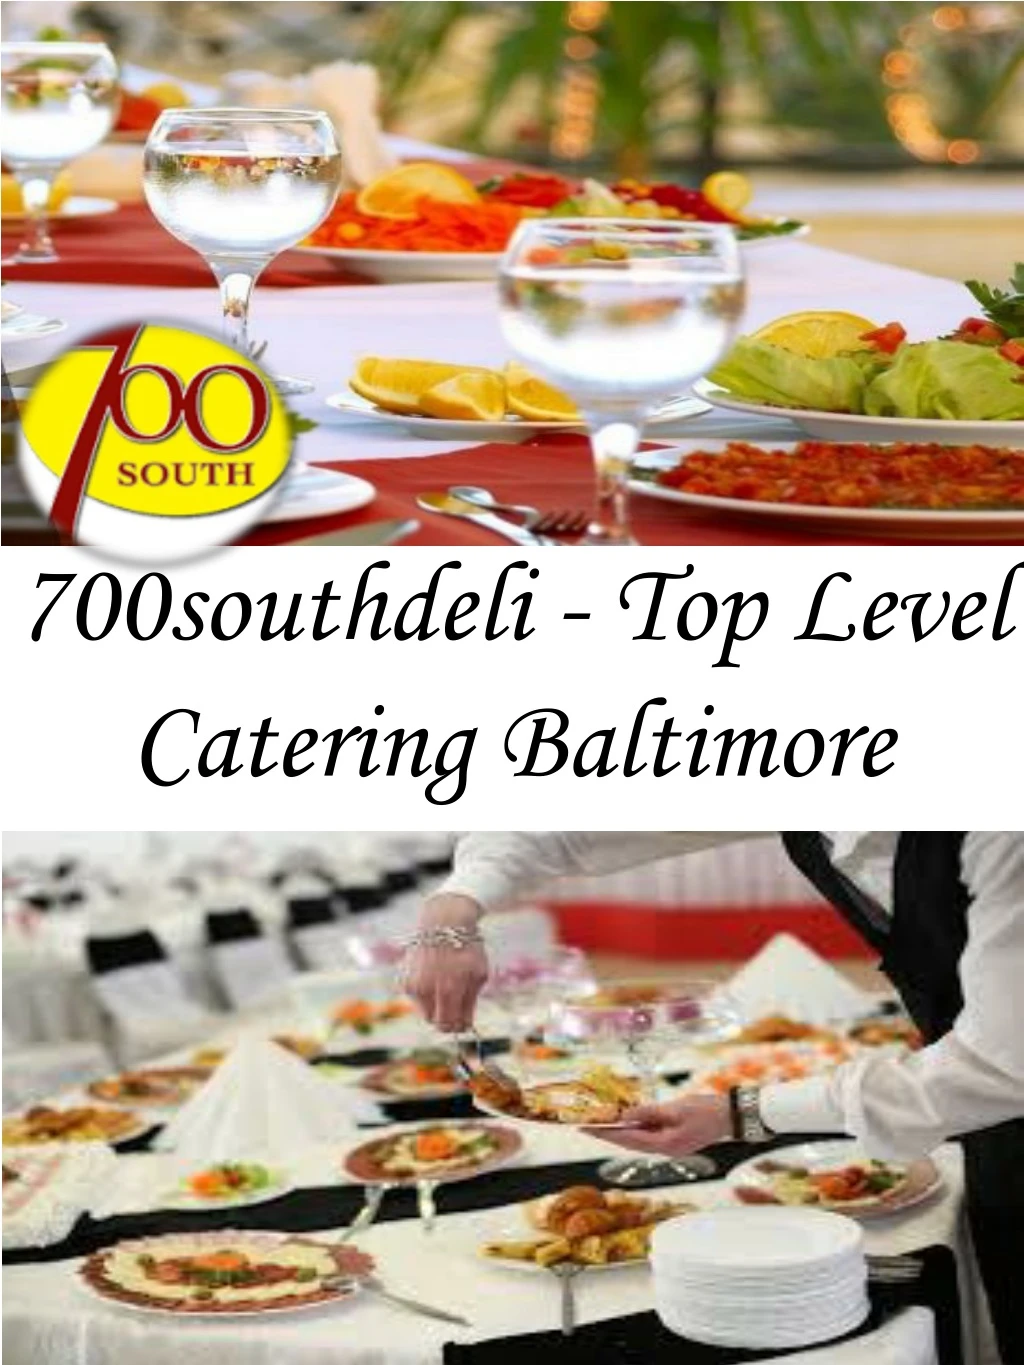 700southdeli top level catering baltimore